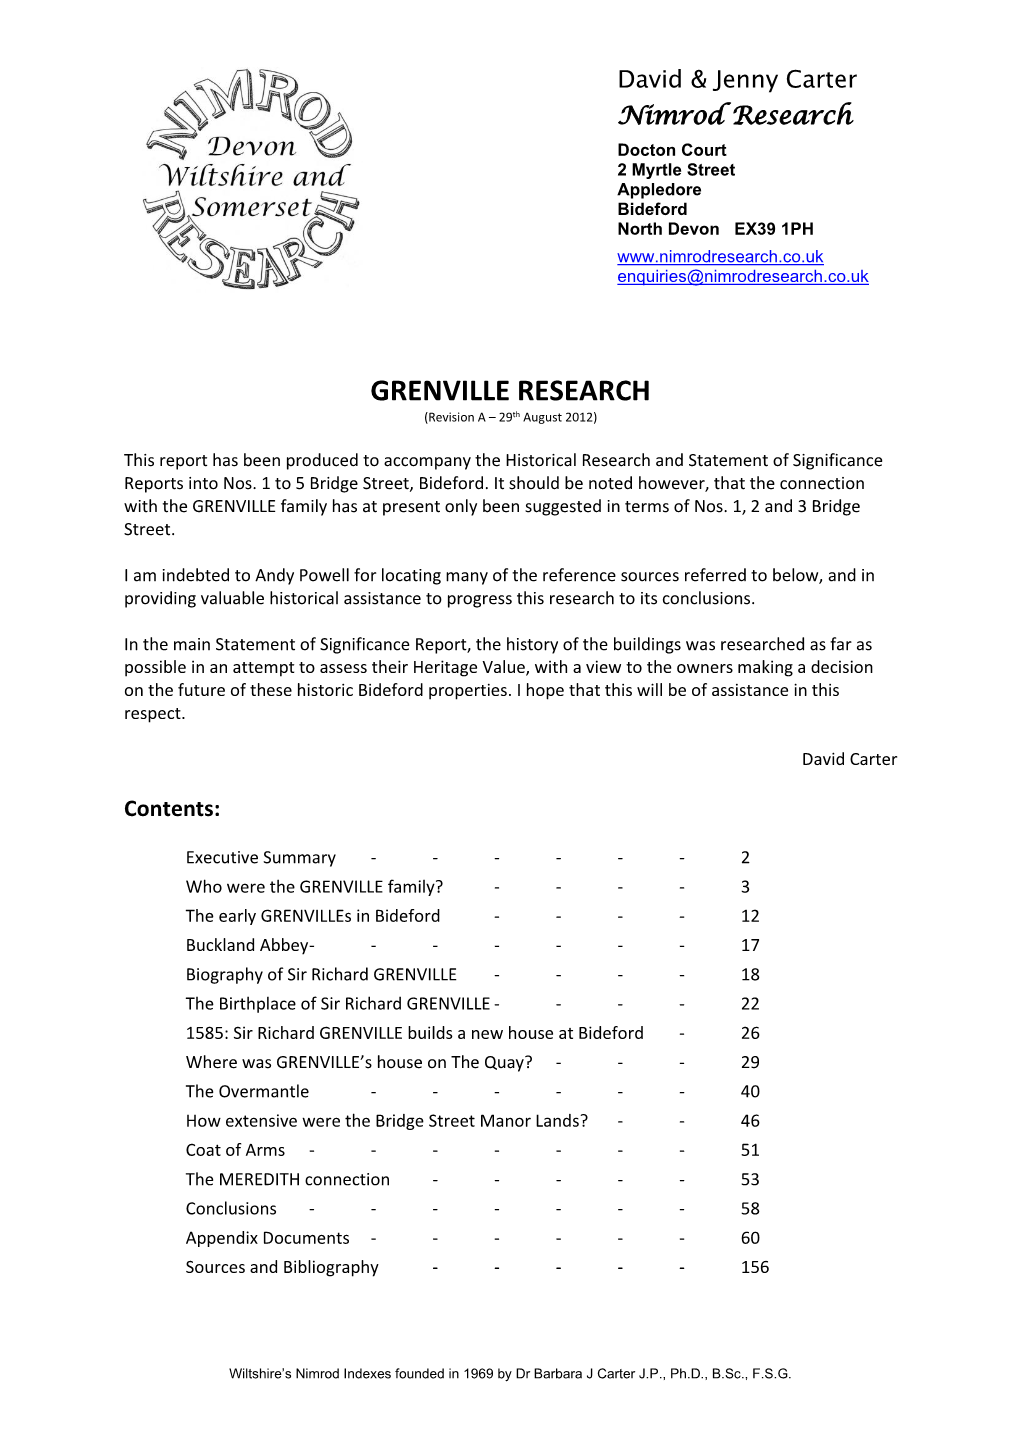 GRENVILLE RESEARCH (Revision a – 29Th August 2012)